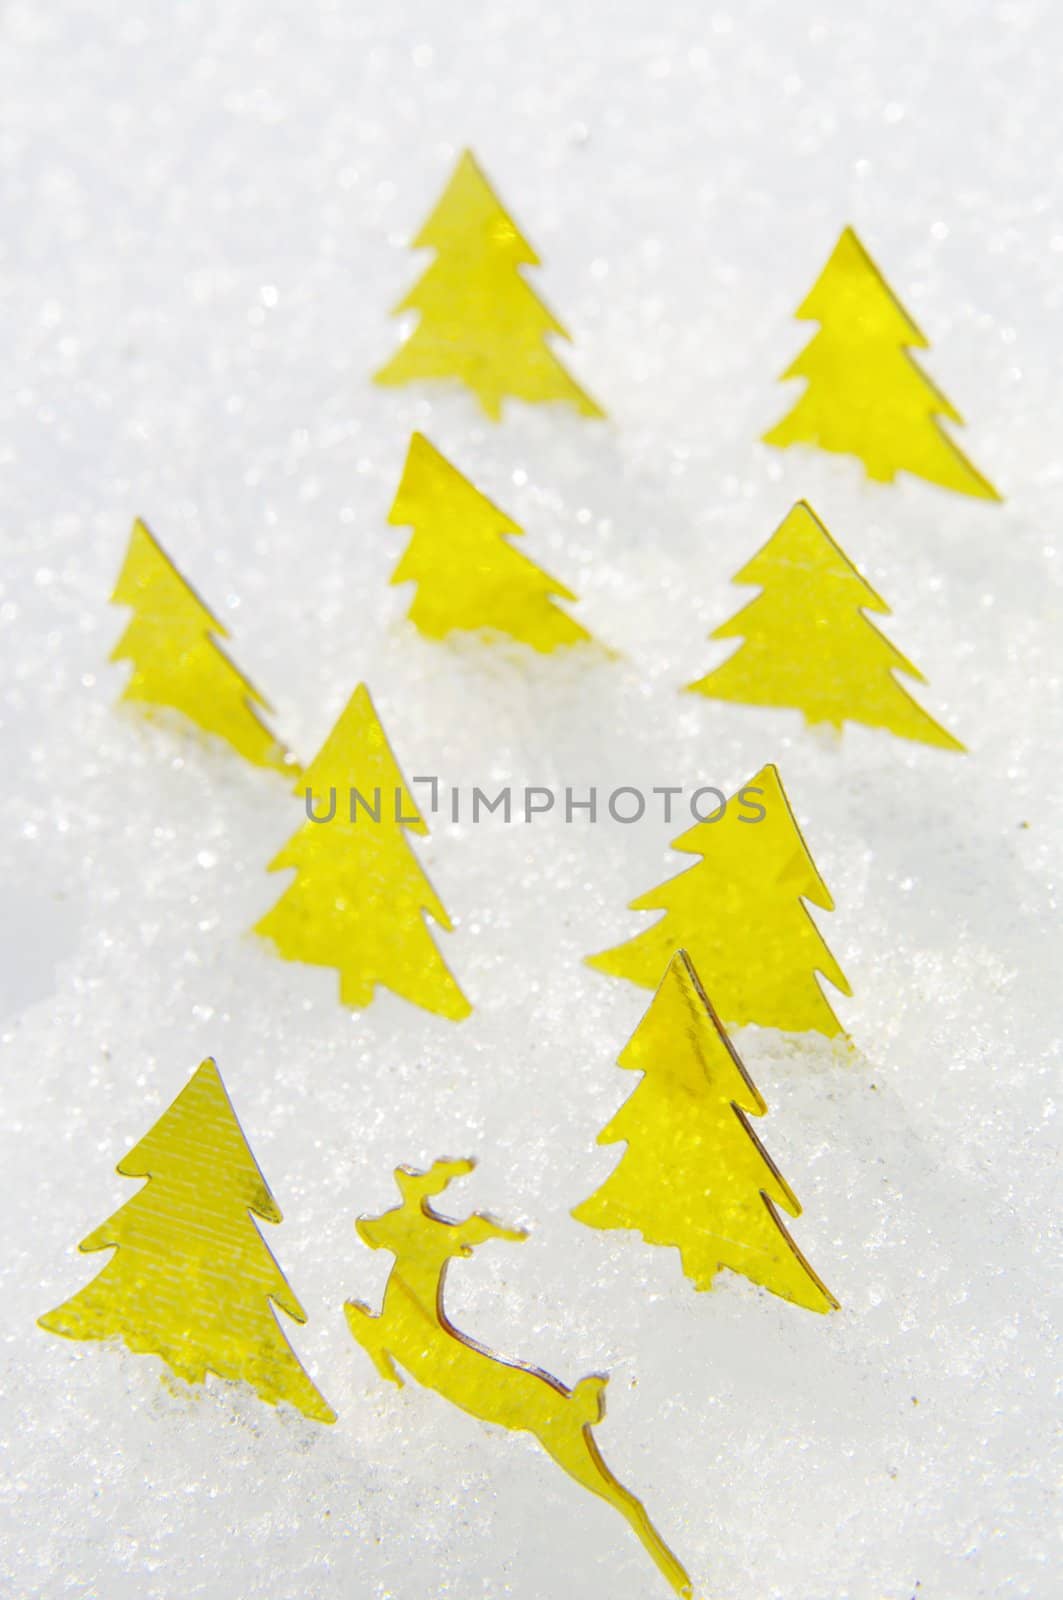 golden trees on a real snowy icy surface